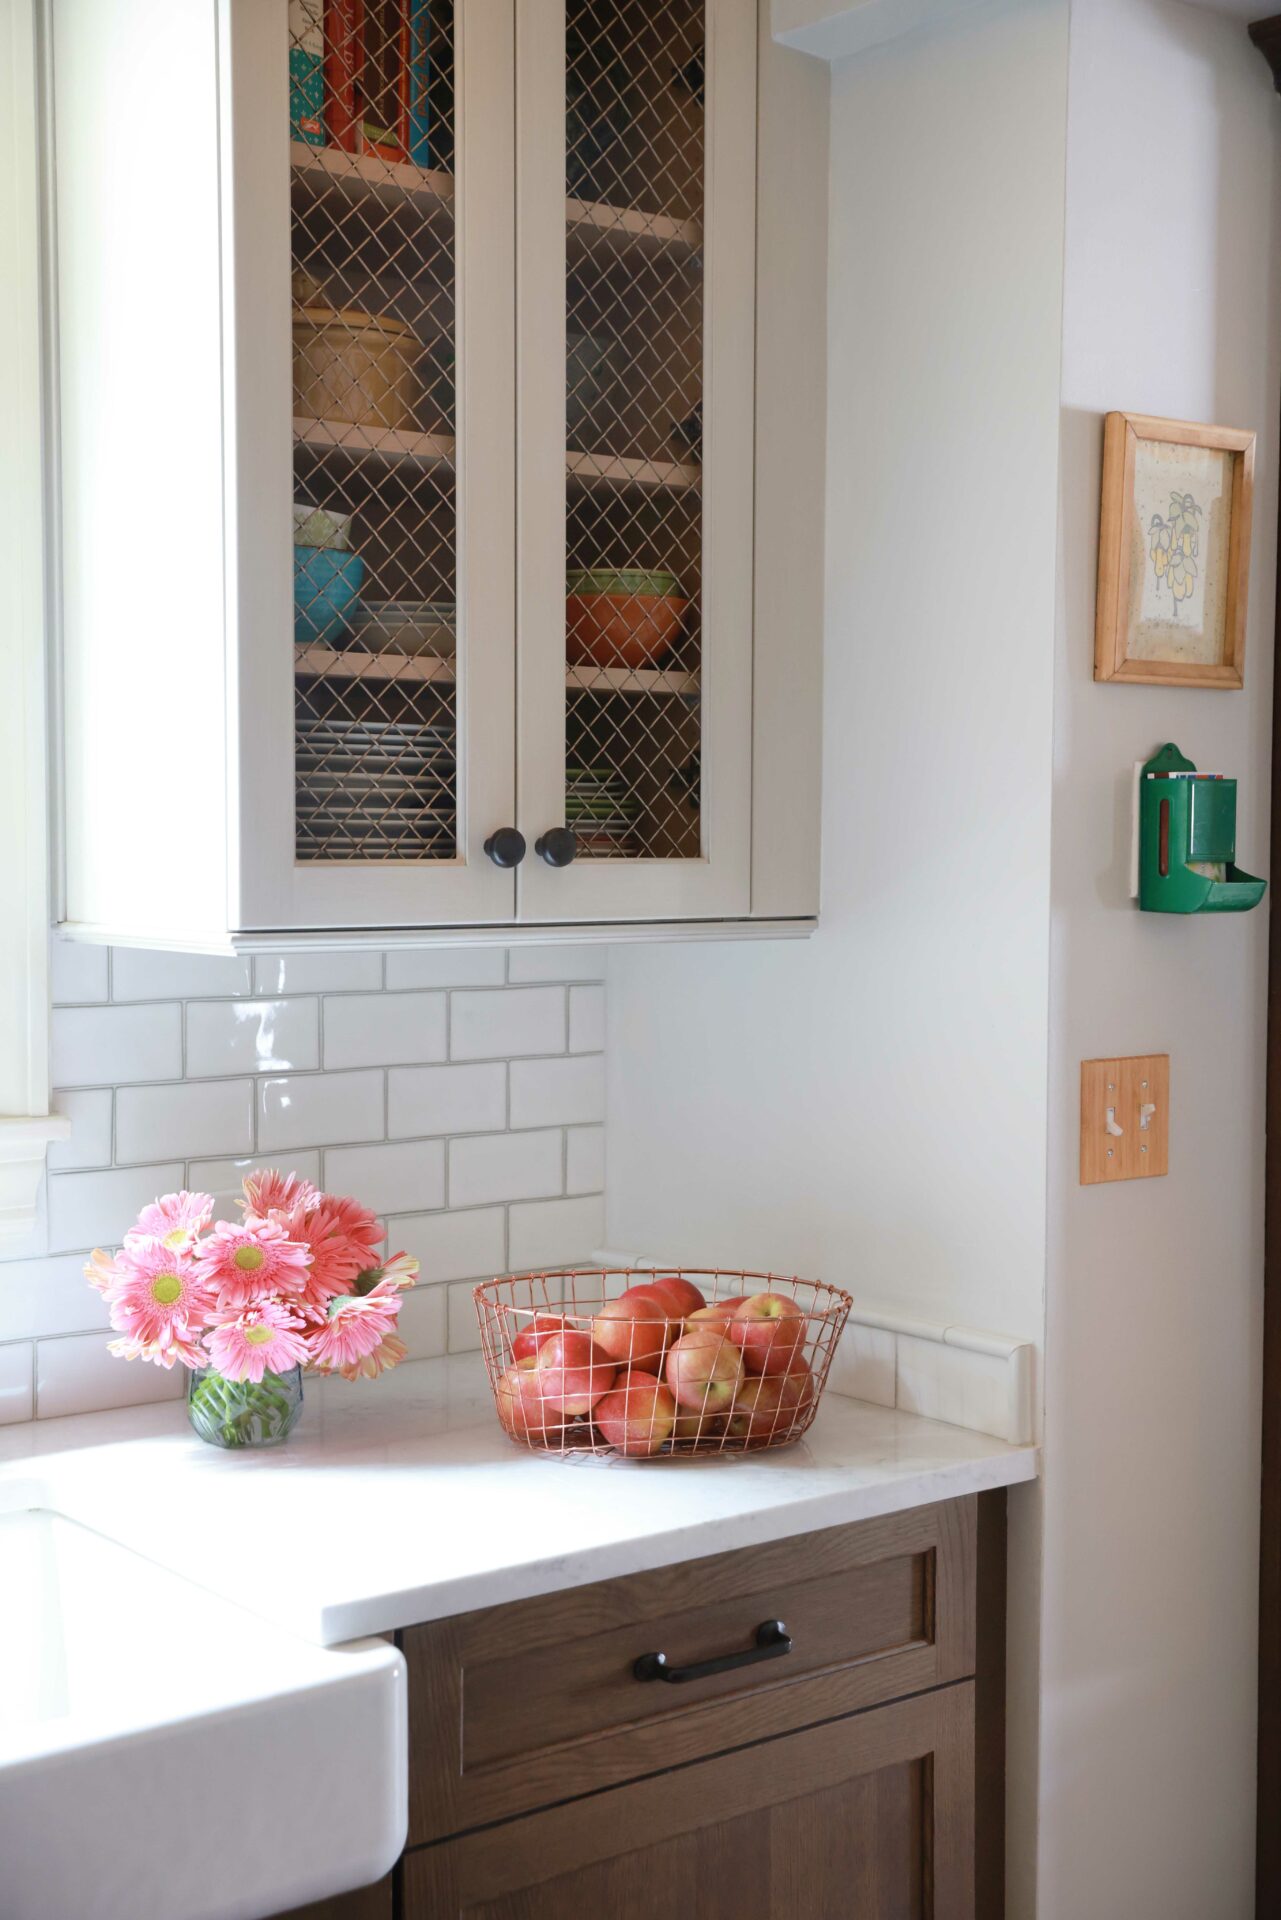 kitchen with wire mesh cabinet fronts